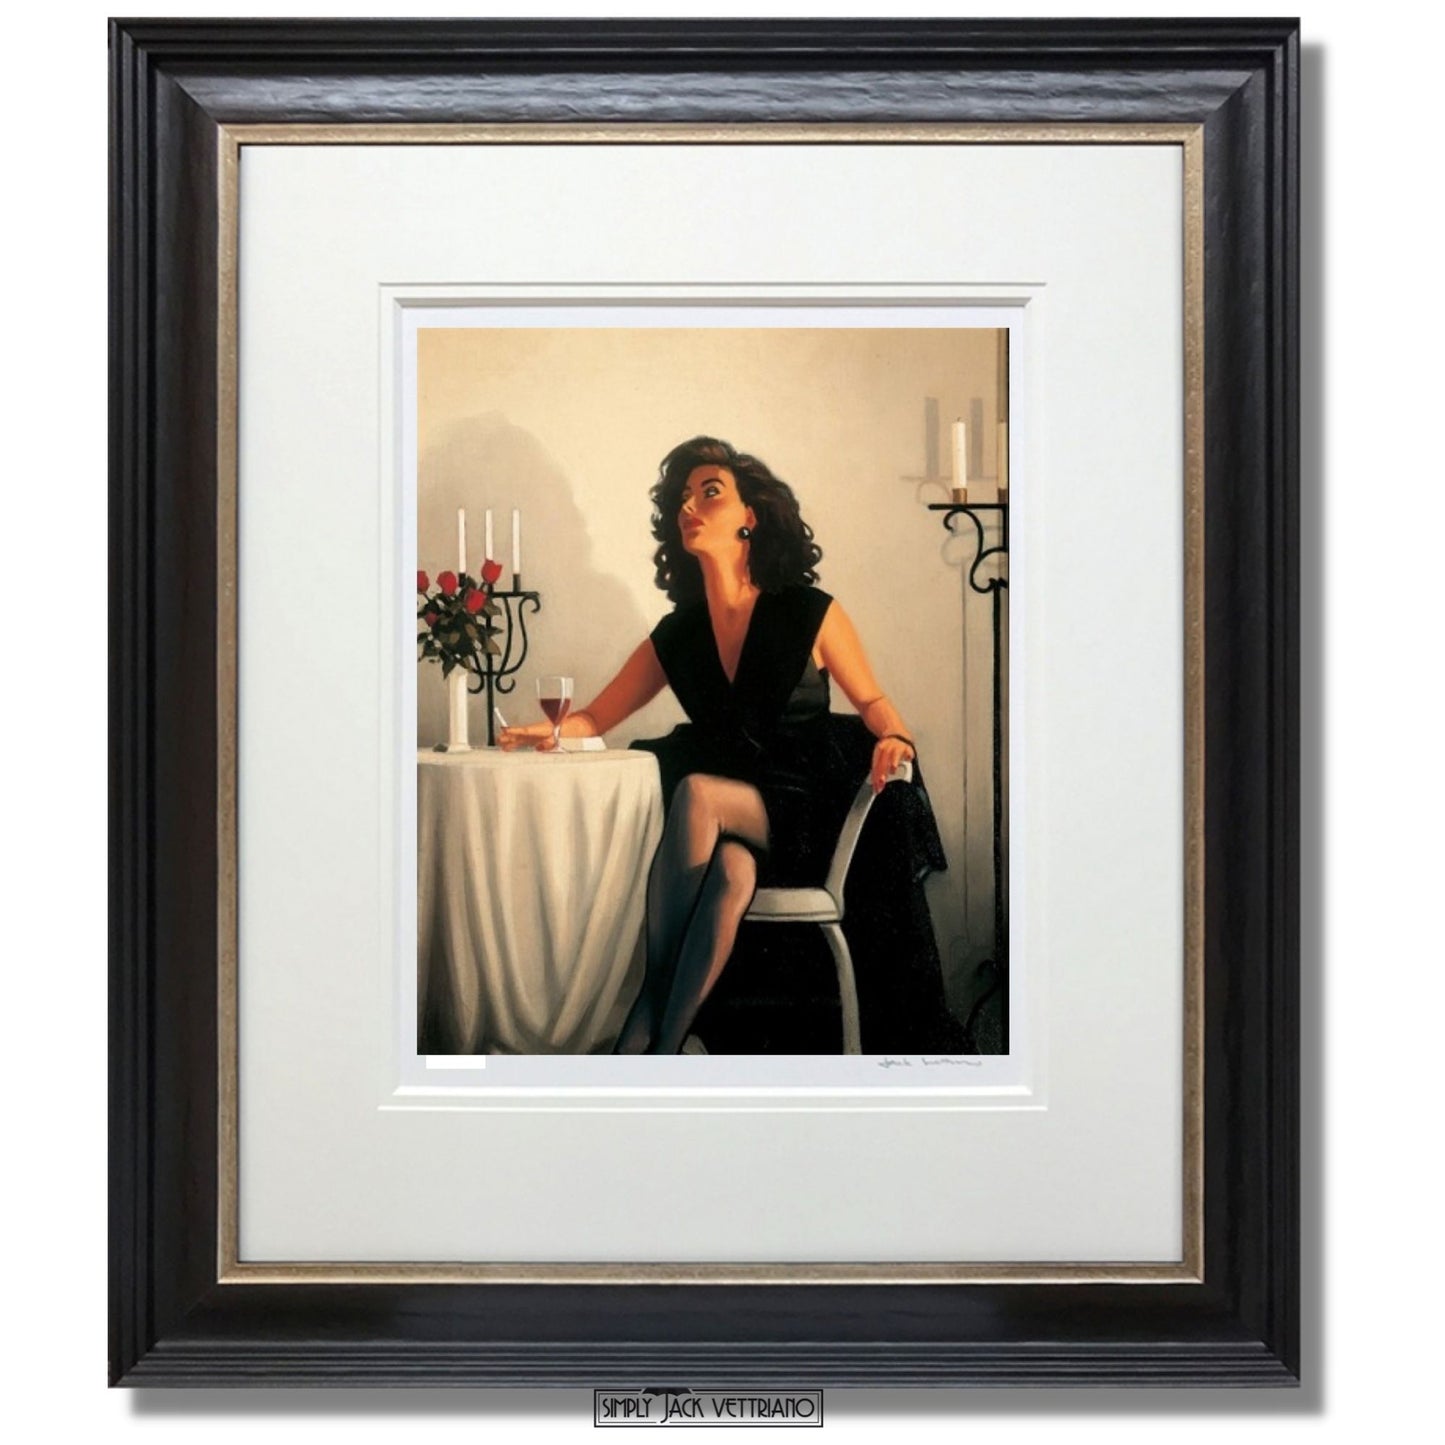 Table for One by Jack Vettriano Limited Edition Framed